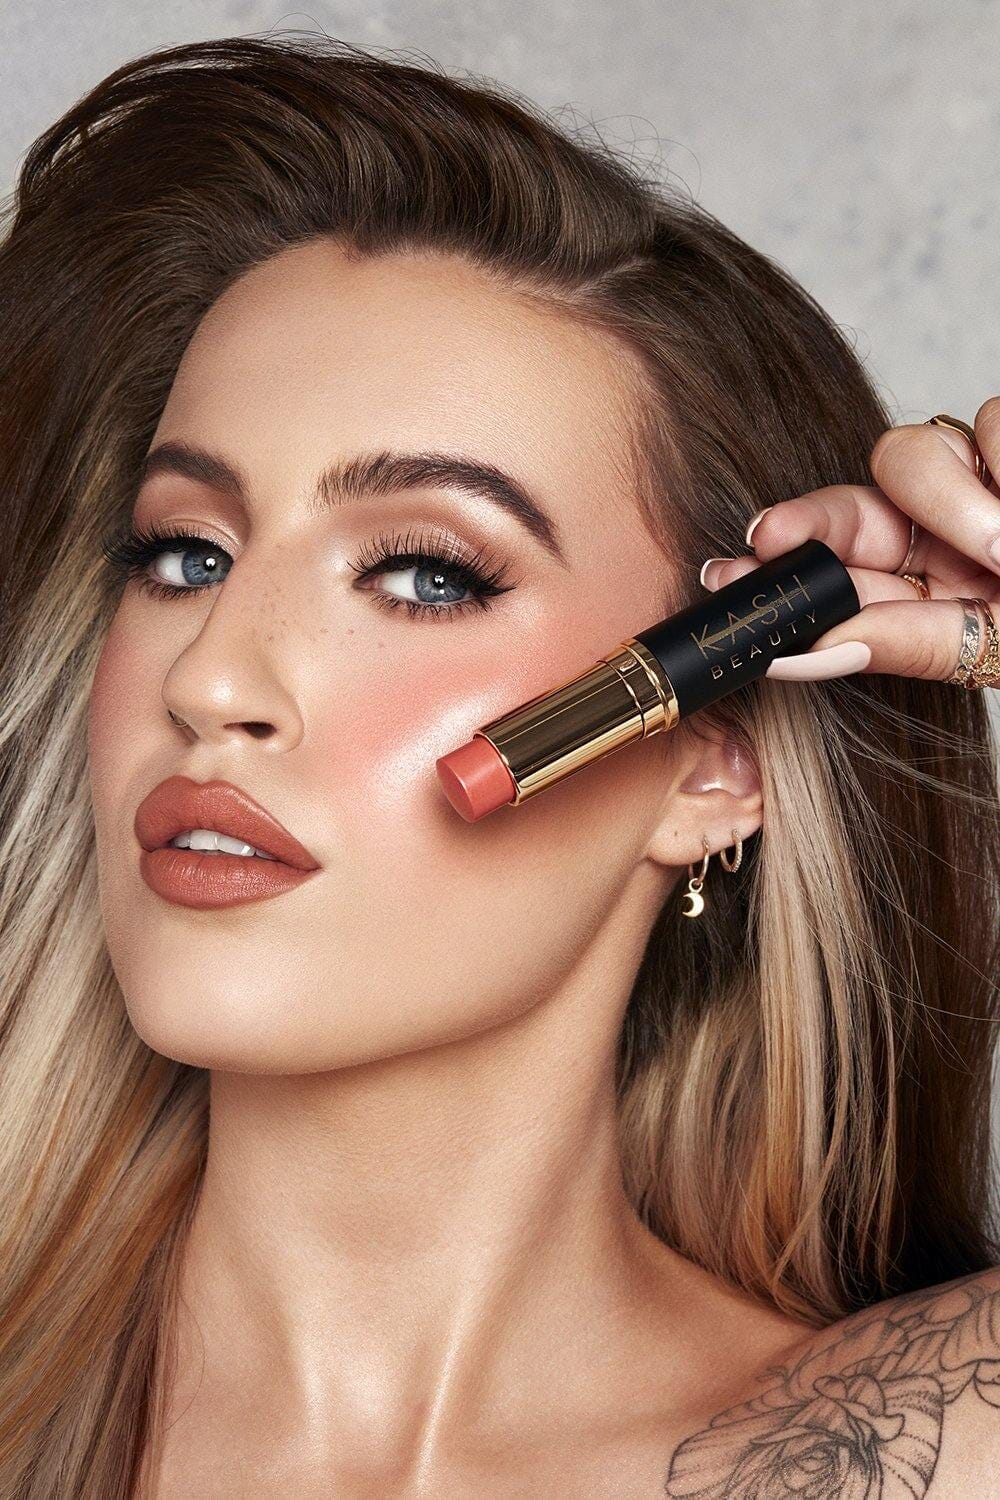 Instagram phenomenon and makeup artist Keilidh Cashell has added cream products to her arsenal at Kash Beauty. - KASH Beauty